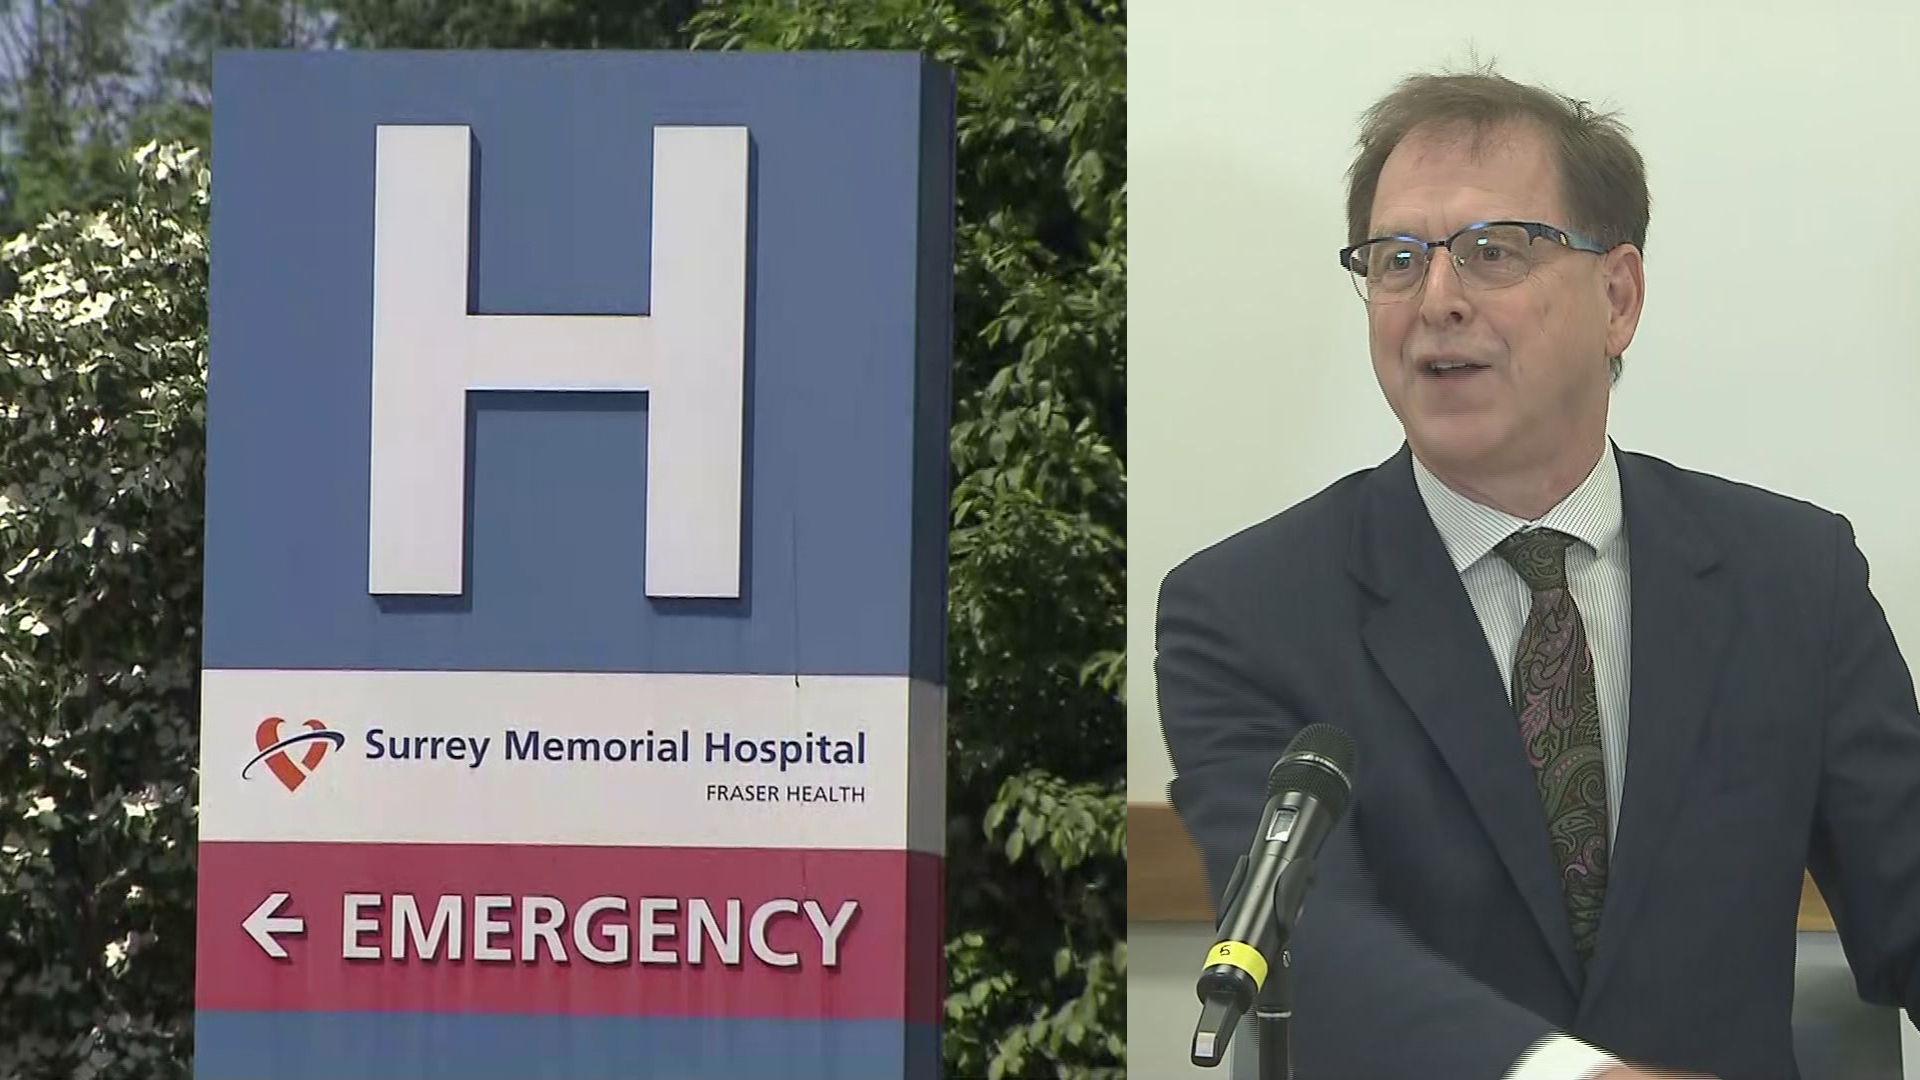 Health Minister provides update on Surrey Memorial Hospital action plan